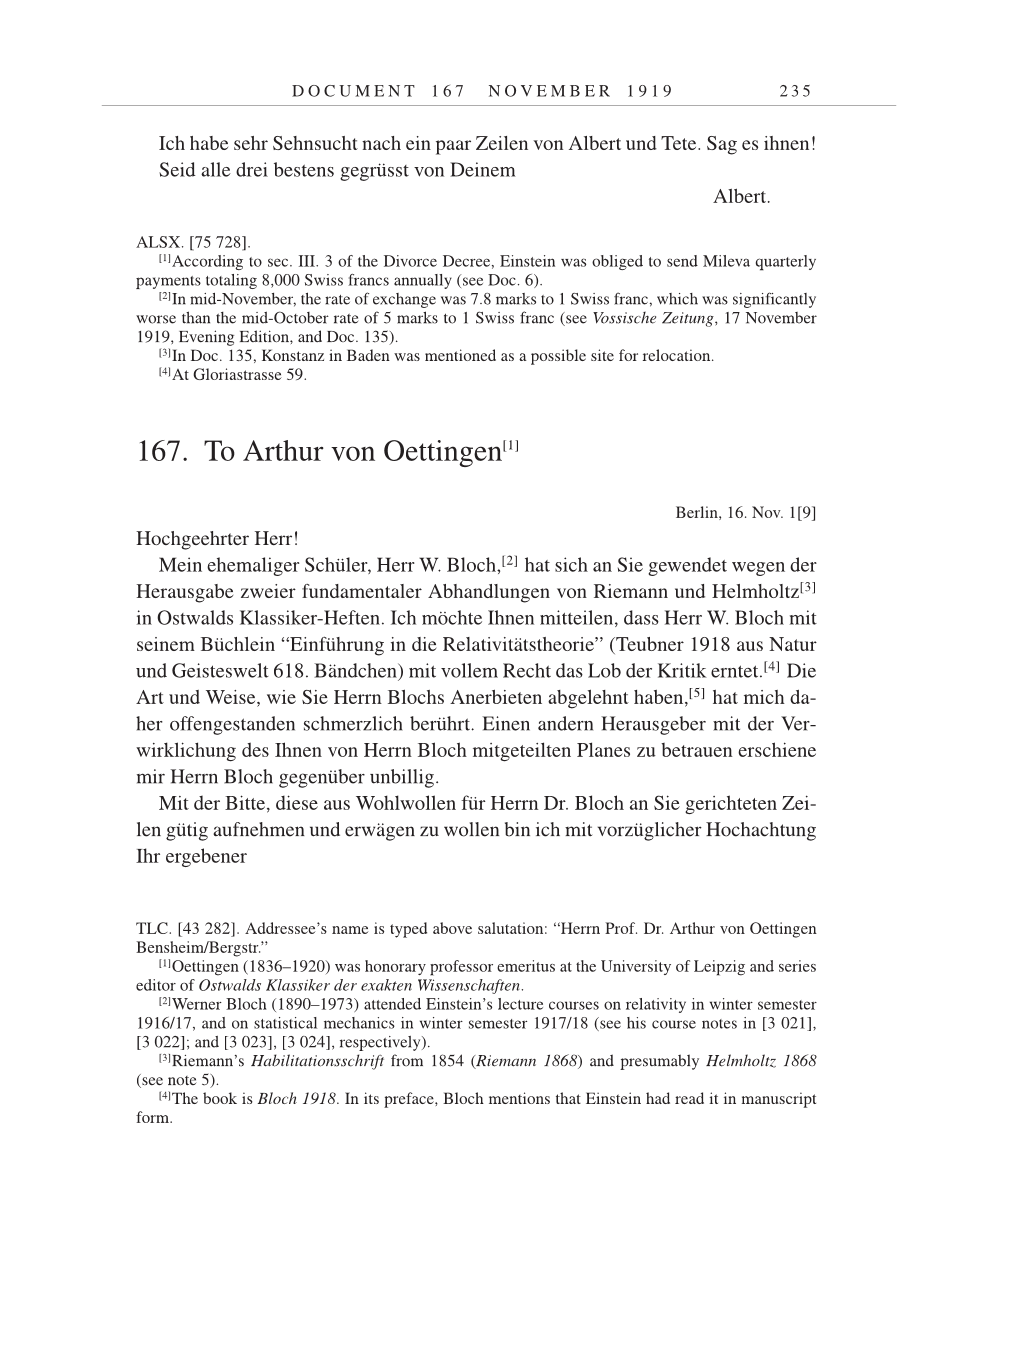 Volume 9: The Berlin Years: Correspondence January 1919-April 1920 page 235